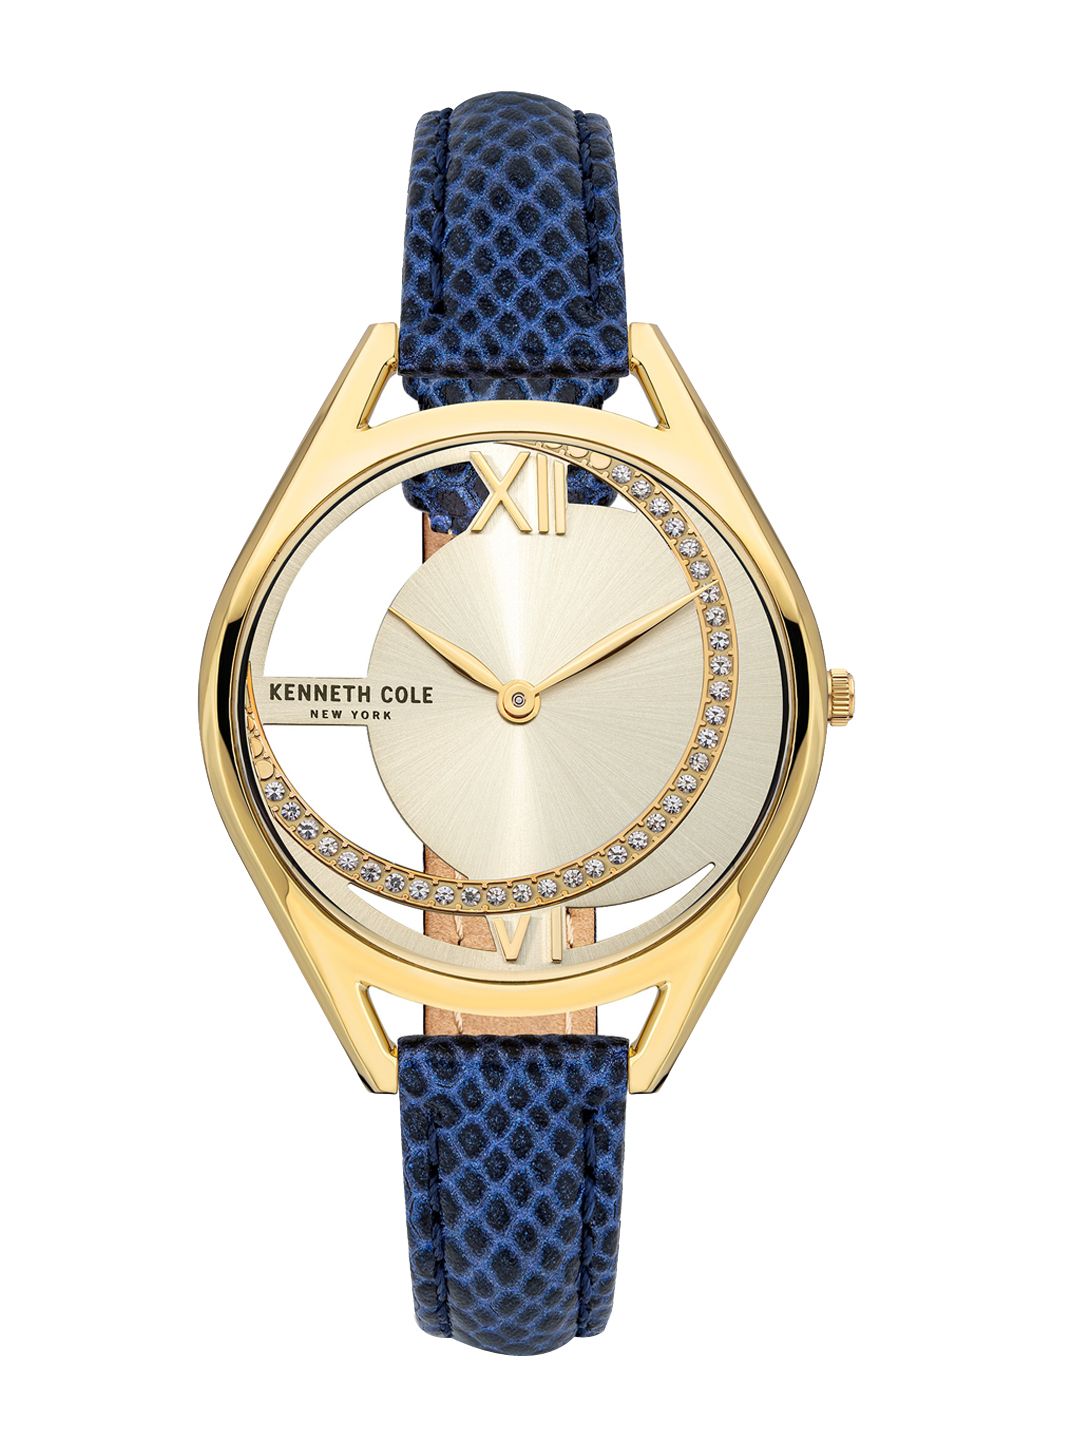 Kenneth Cole Women Gold-Toned Dial & Blue Leather Straps Analogue Watch KCWLA2124201LD Price in India